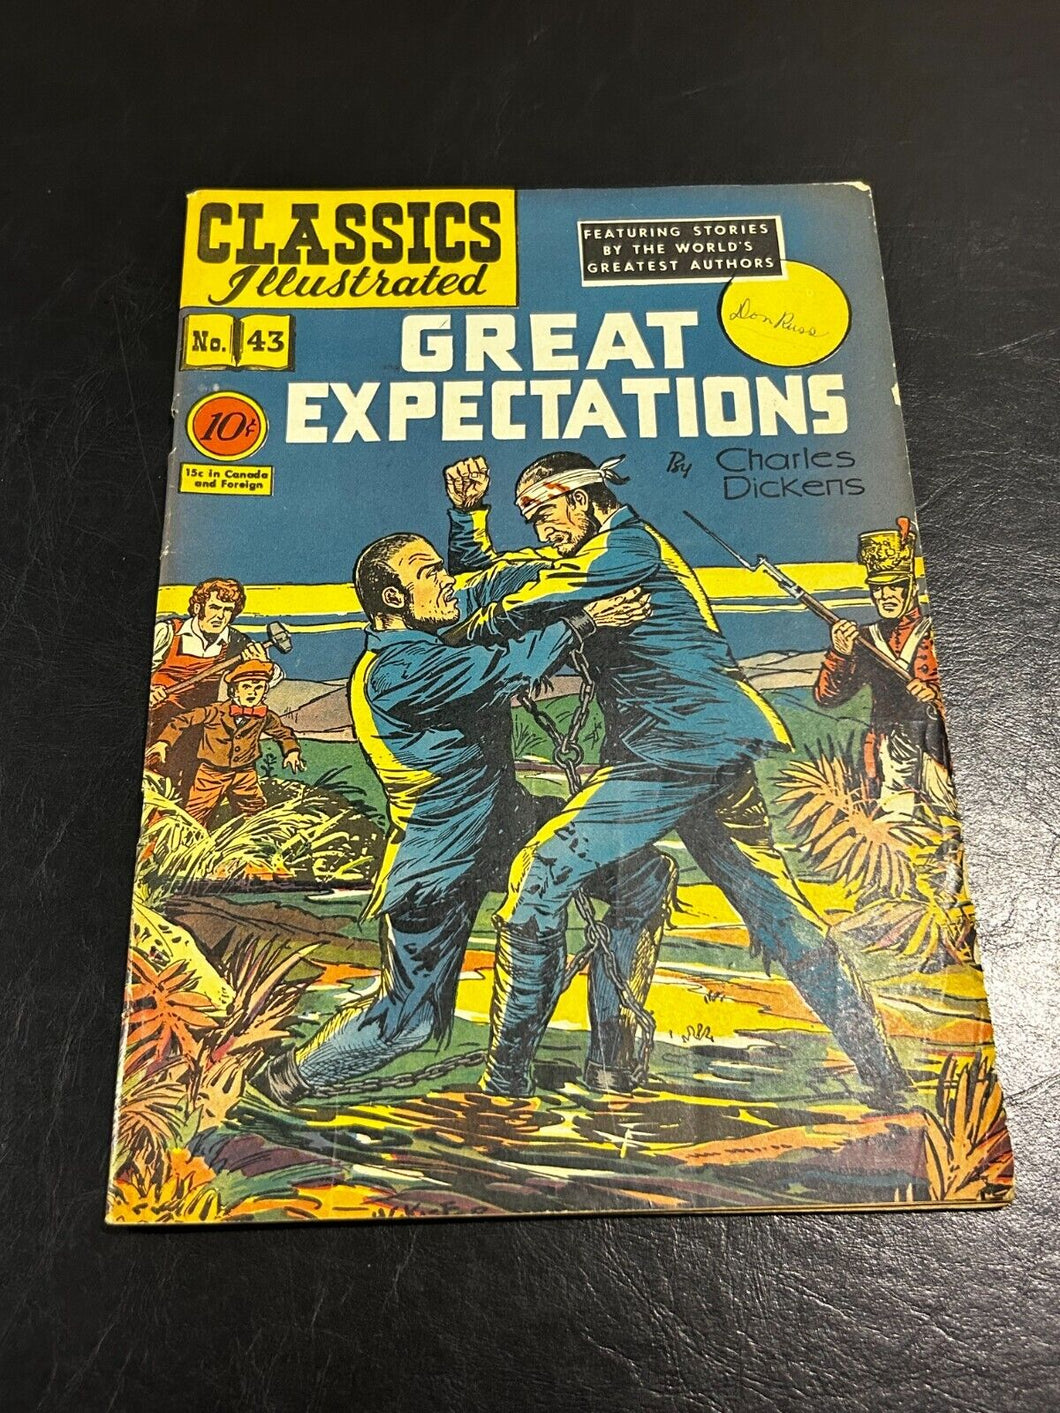 1947 Classics Illustrated Great Expectations by Charles Dickens #43 1st Print